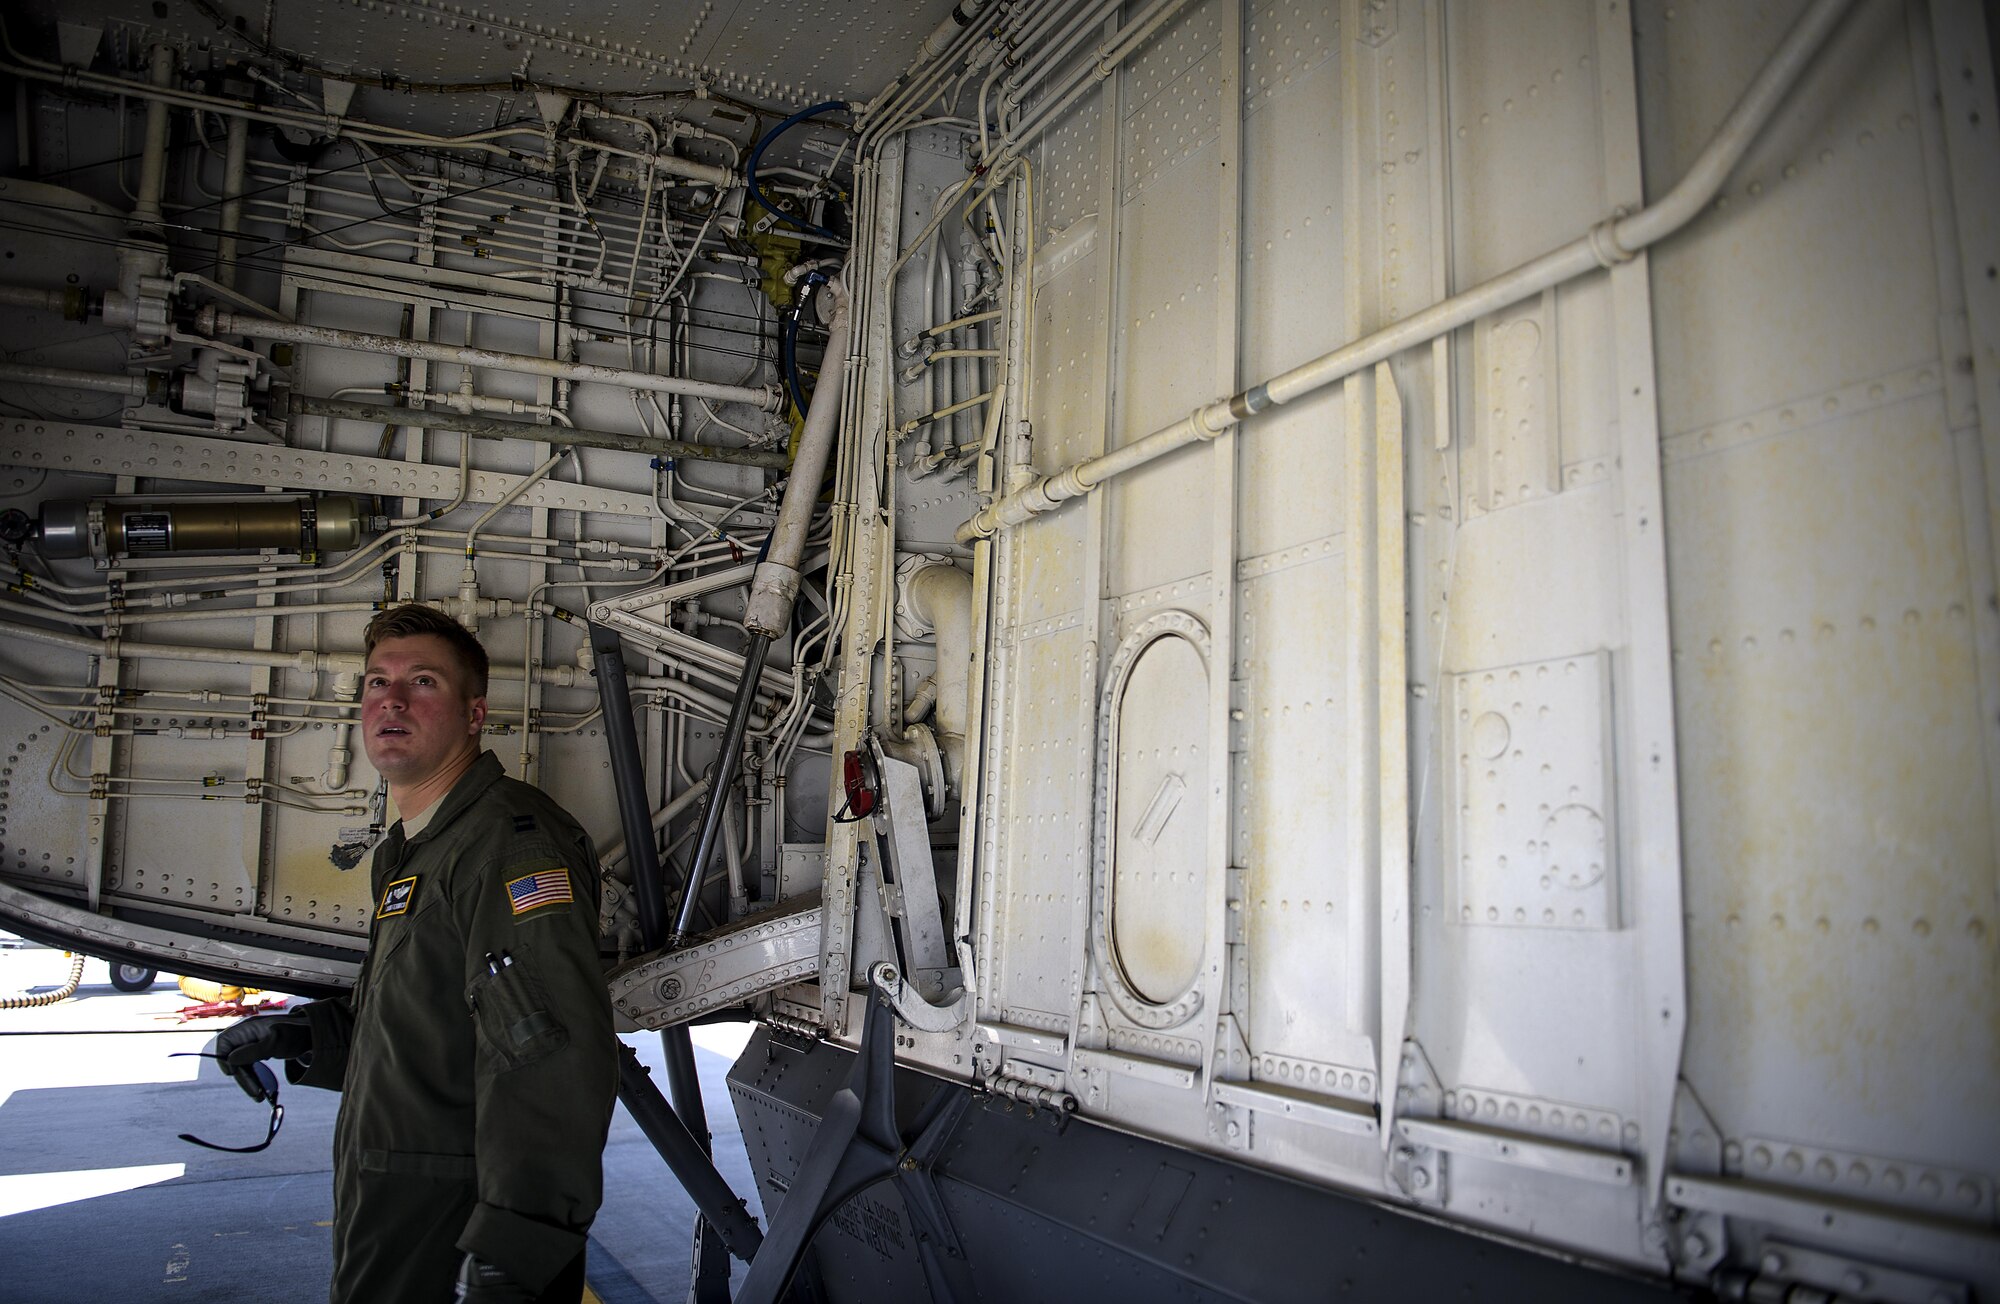 Capt. Dan Fenwick, a KC-135 Stratotanker pilot from MacDill Air Force Base, conducts pre-flight checks at Nellis Air Force Base, Nevada July 18, 2015 during exercise Red Flag. Red Flag 16-3 is one of four Red Flag exercises at Nellis--this edition of Red Flag focusing on multi-domain operations in air, space and cyberspace. (U.S. Air Force photo/Tech. Sgt. David Salanitri)